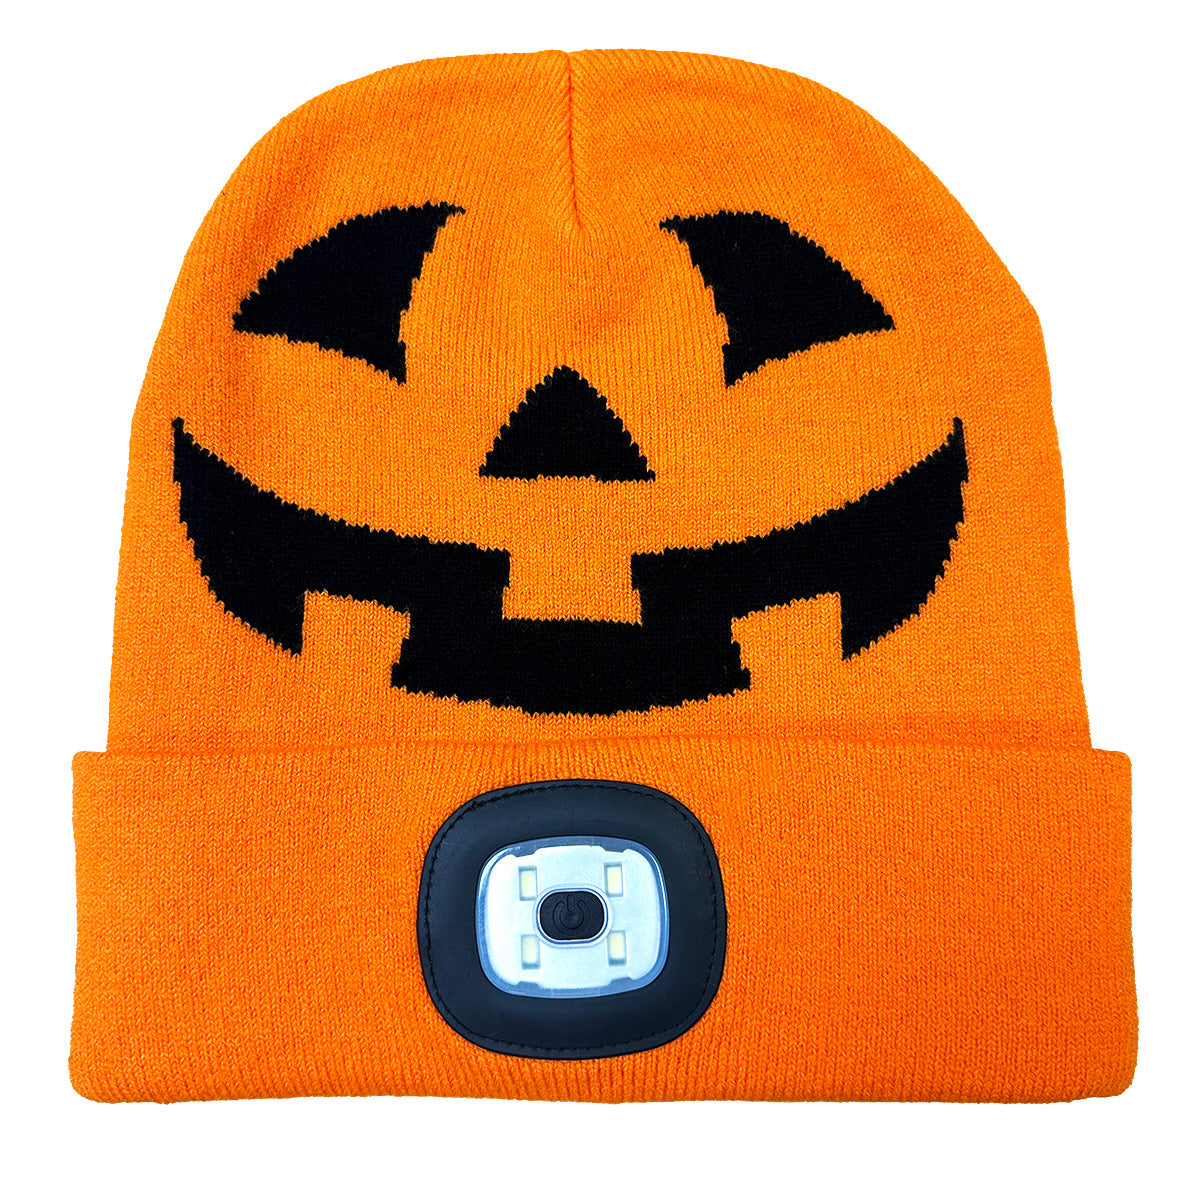 ITEM NUMBER 024804 LED HALLOWEEN HATS 6 PIECES PER DISPLAY